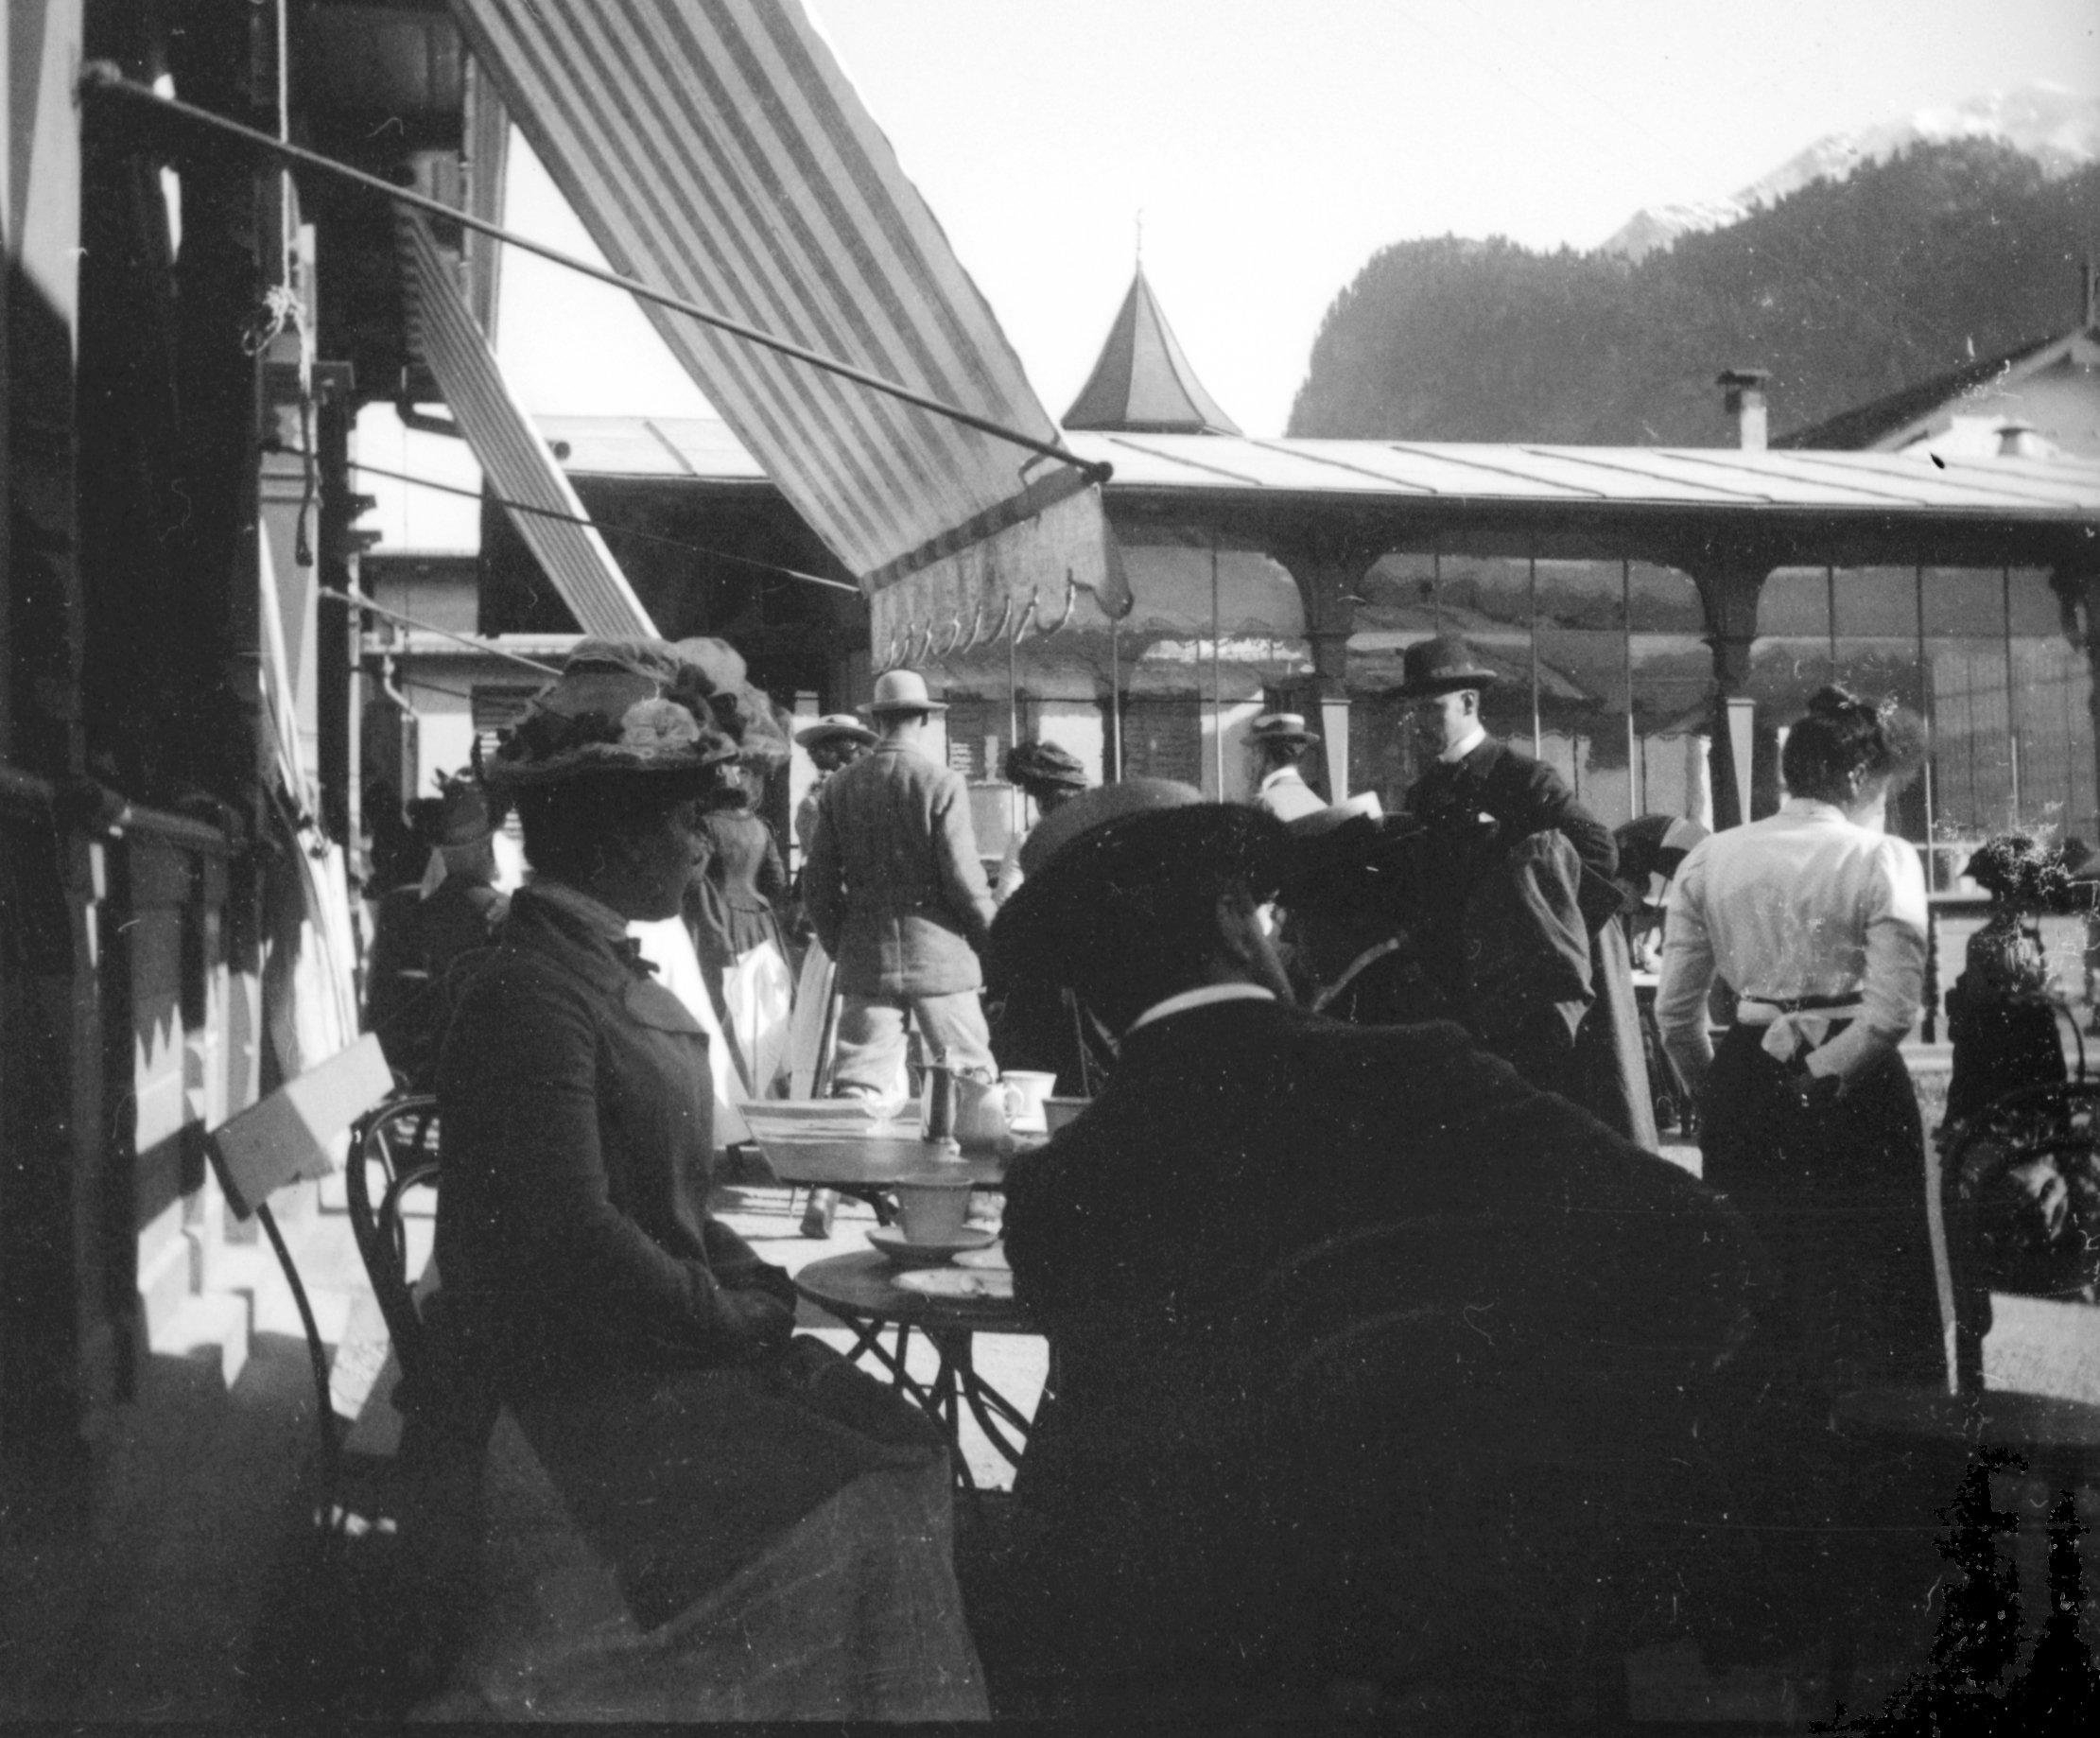 Patisserie A Ma Campagne in Pontresina (Sommer 1901), 87076 sn R_o (DRM CC BY-NC-SA)